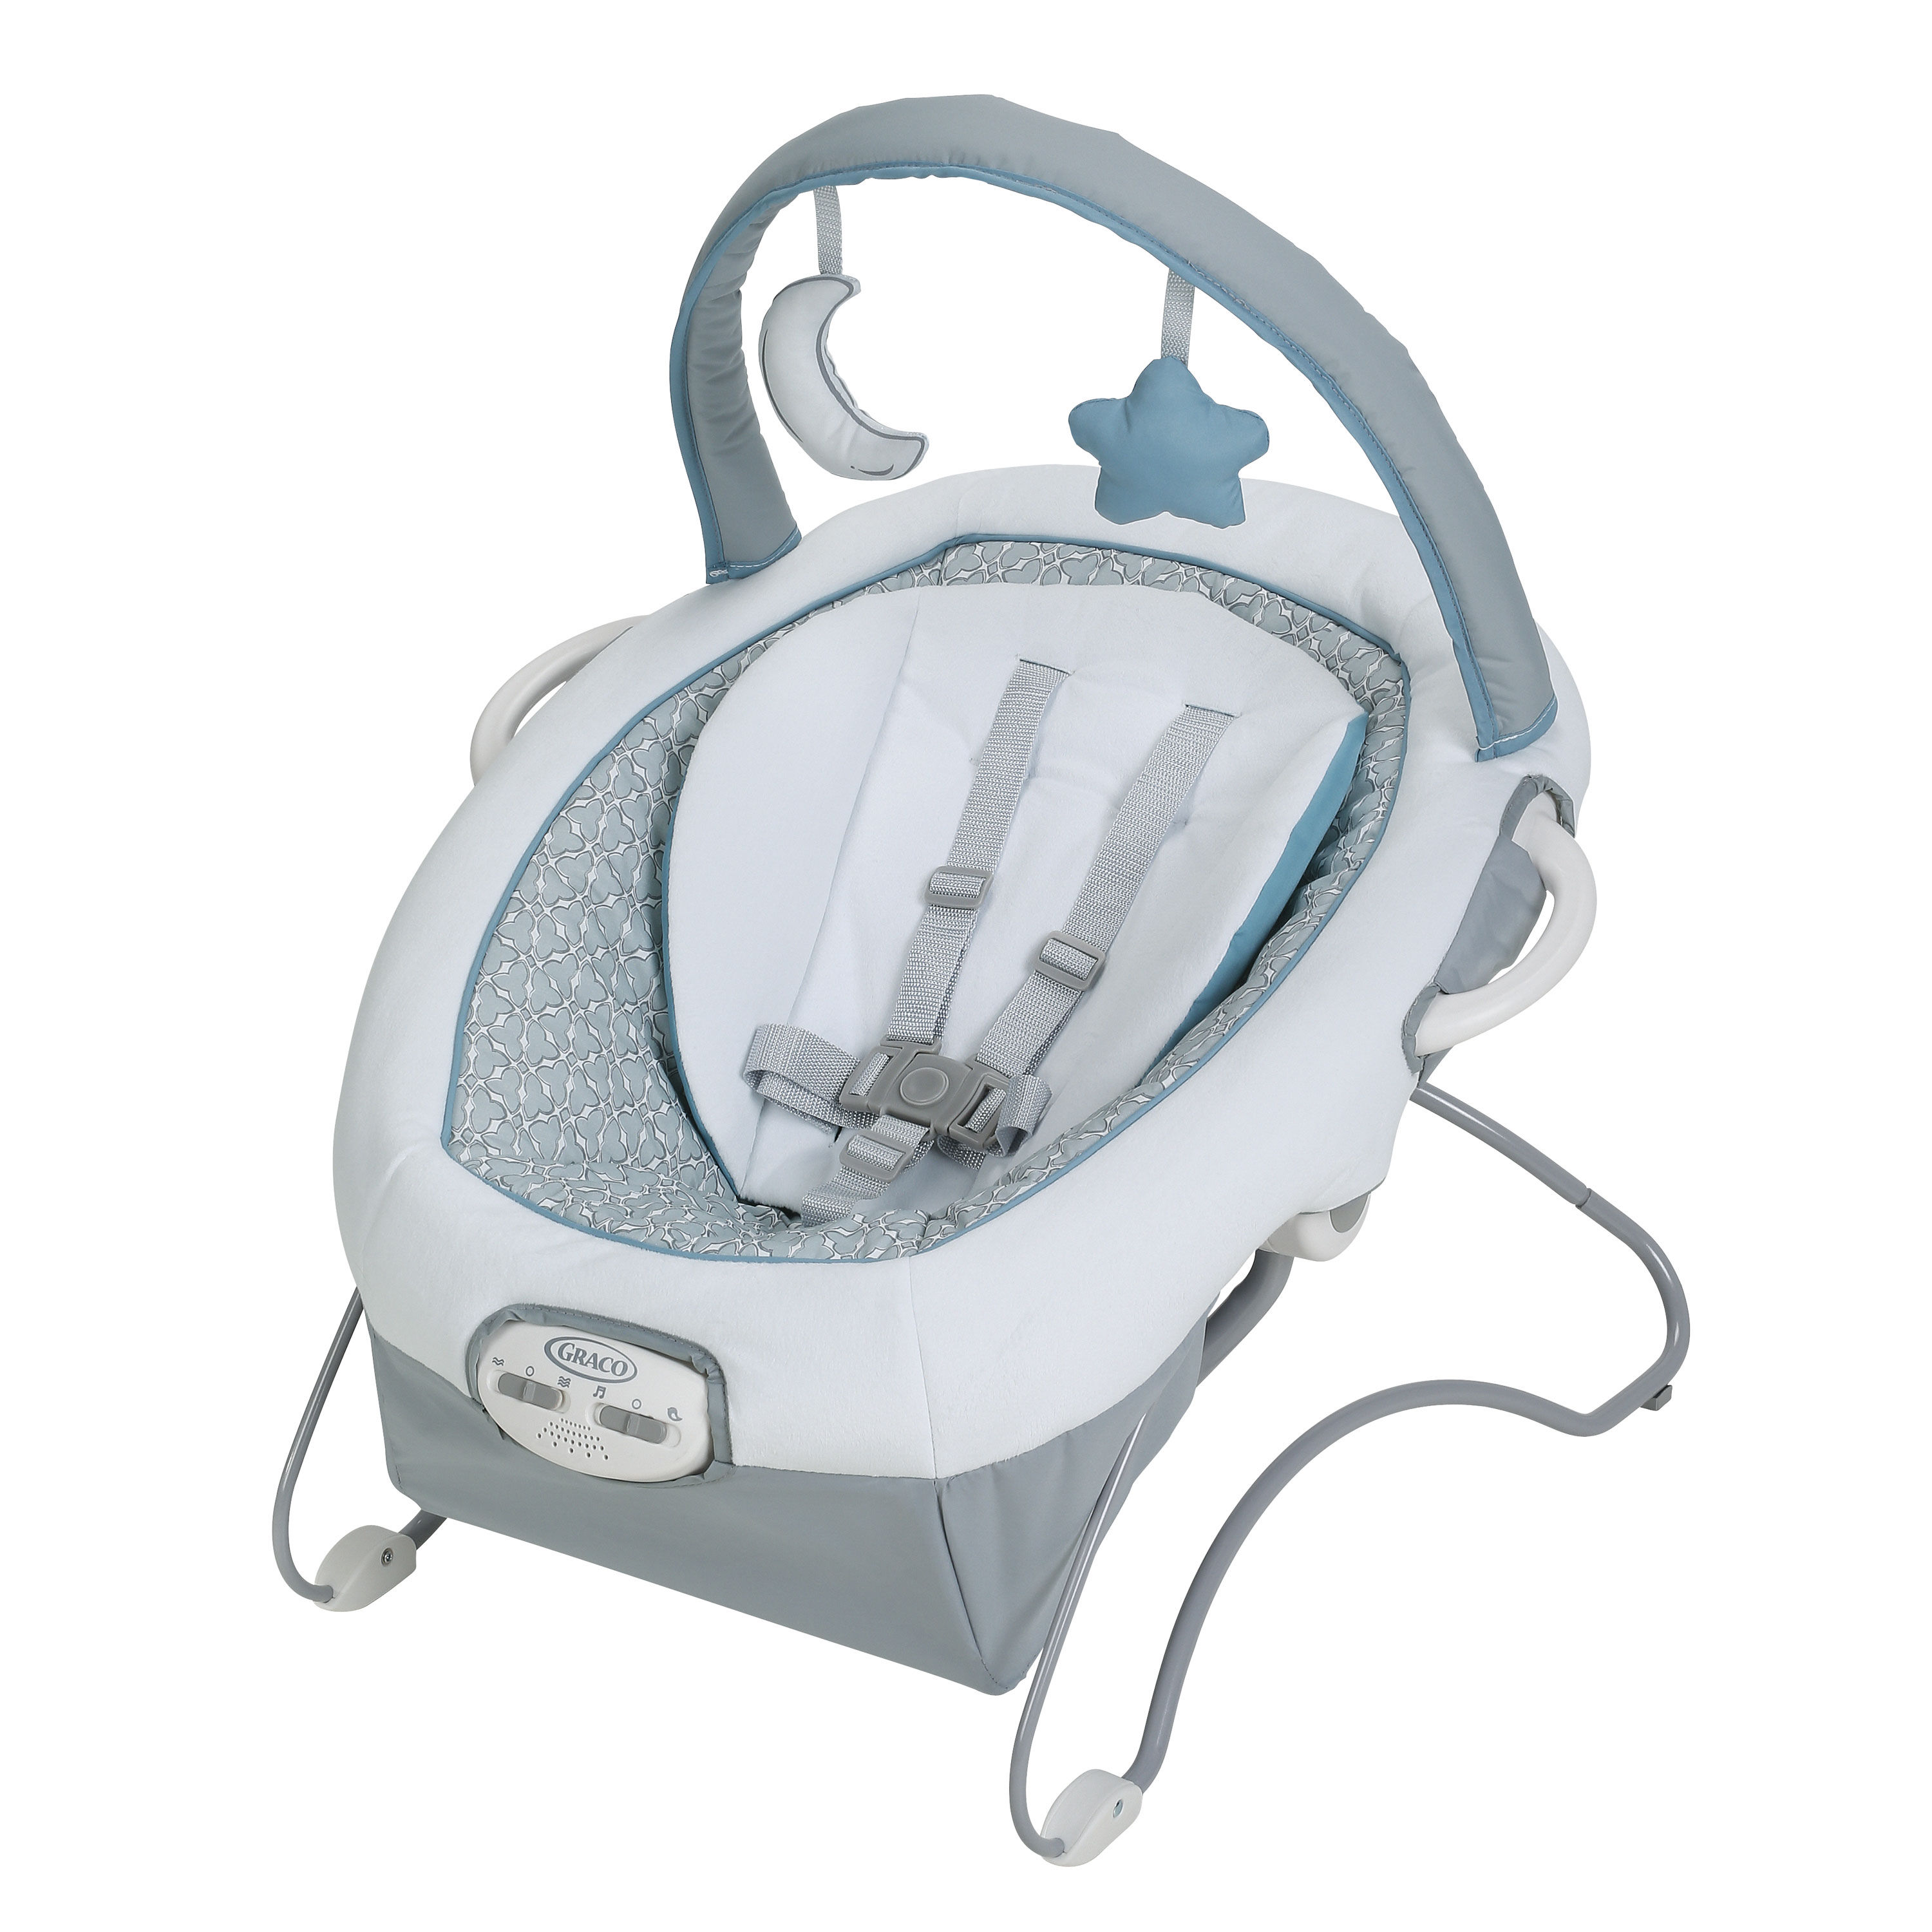 graco duet sway lx swing with portable bouncer review